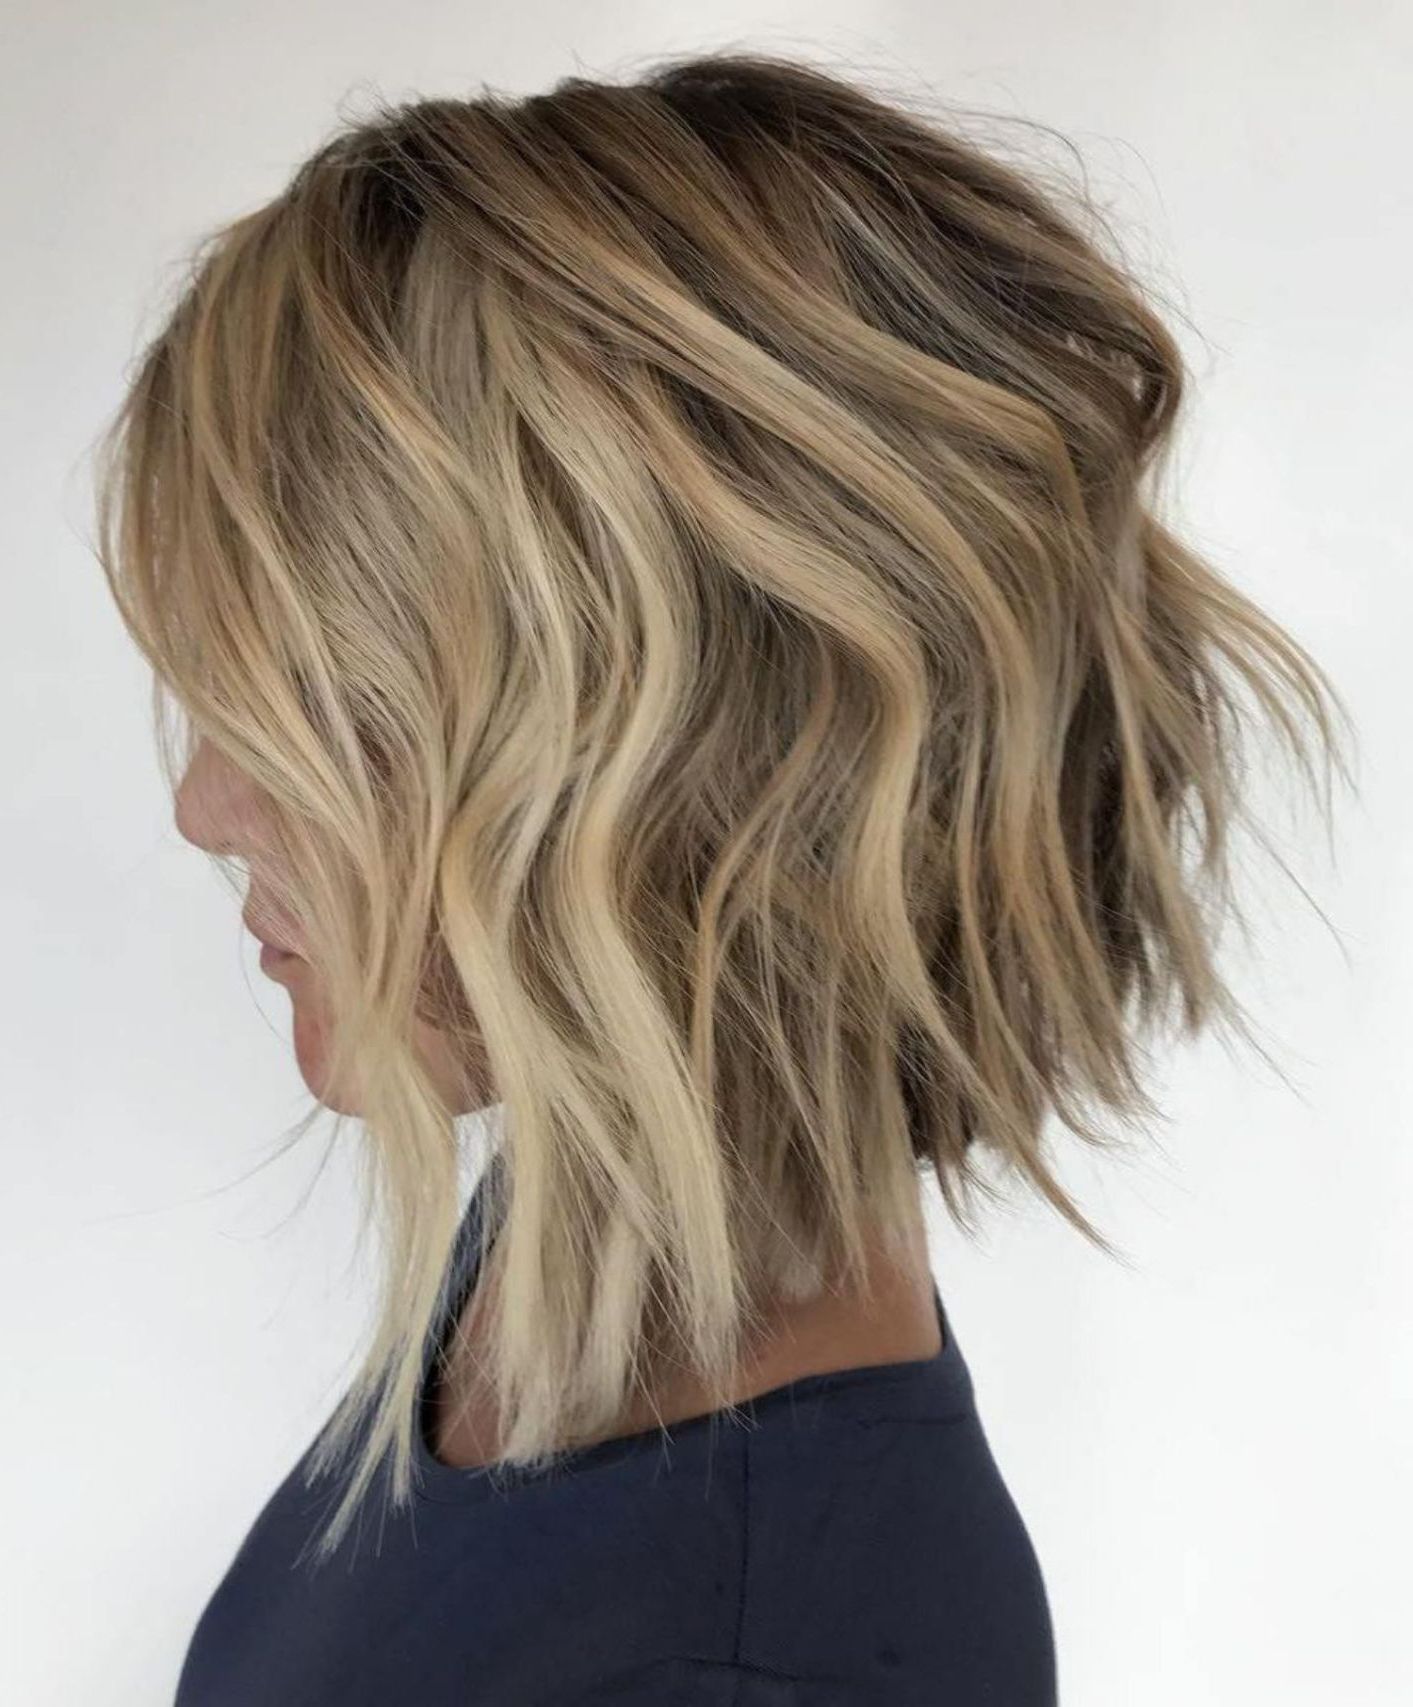 50 Gorgeous Wavy Bob Hairstyles With An Extra Touch Of Femininity In For Recent Choppy Waves Hairstyles (View 15 of 20)